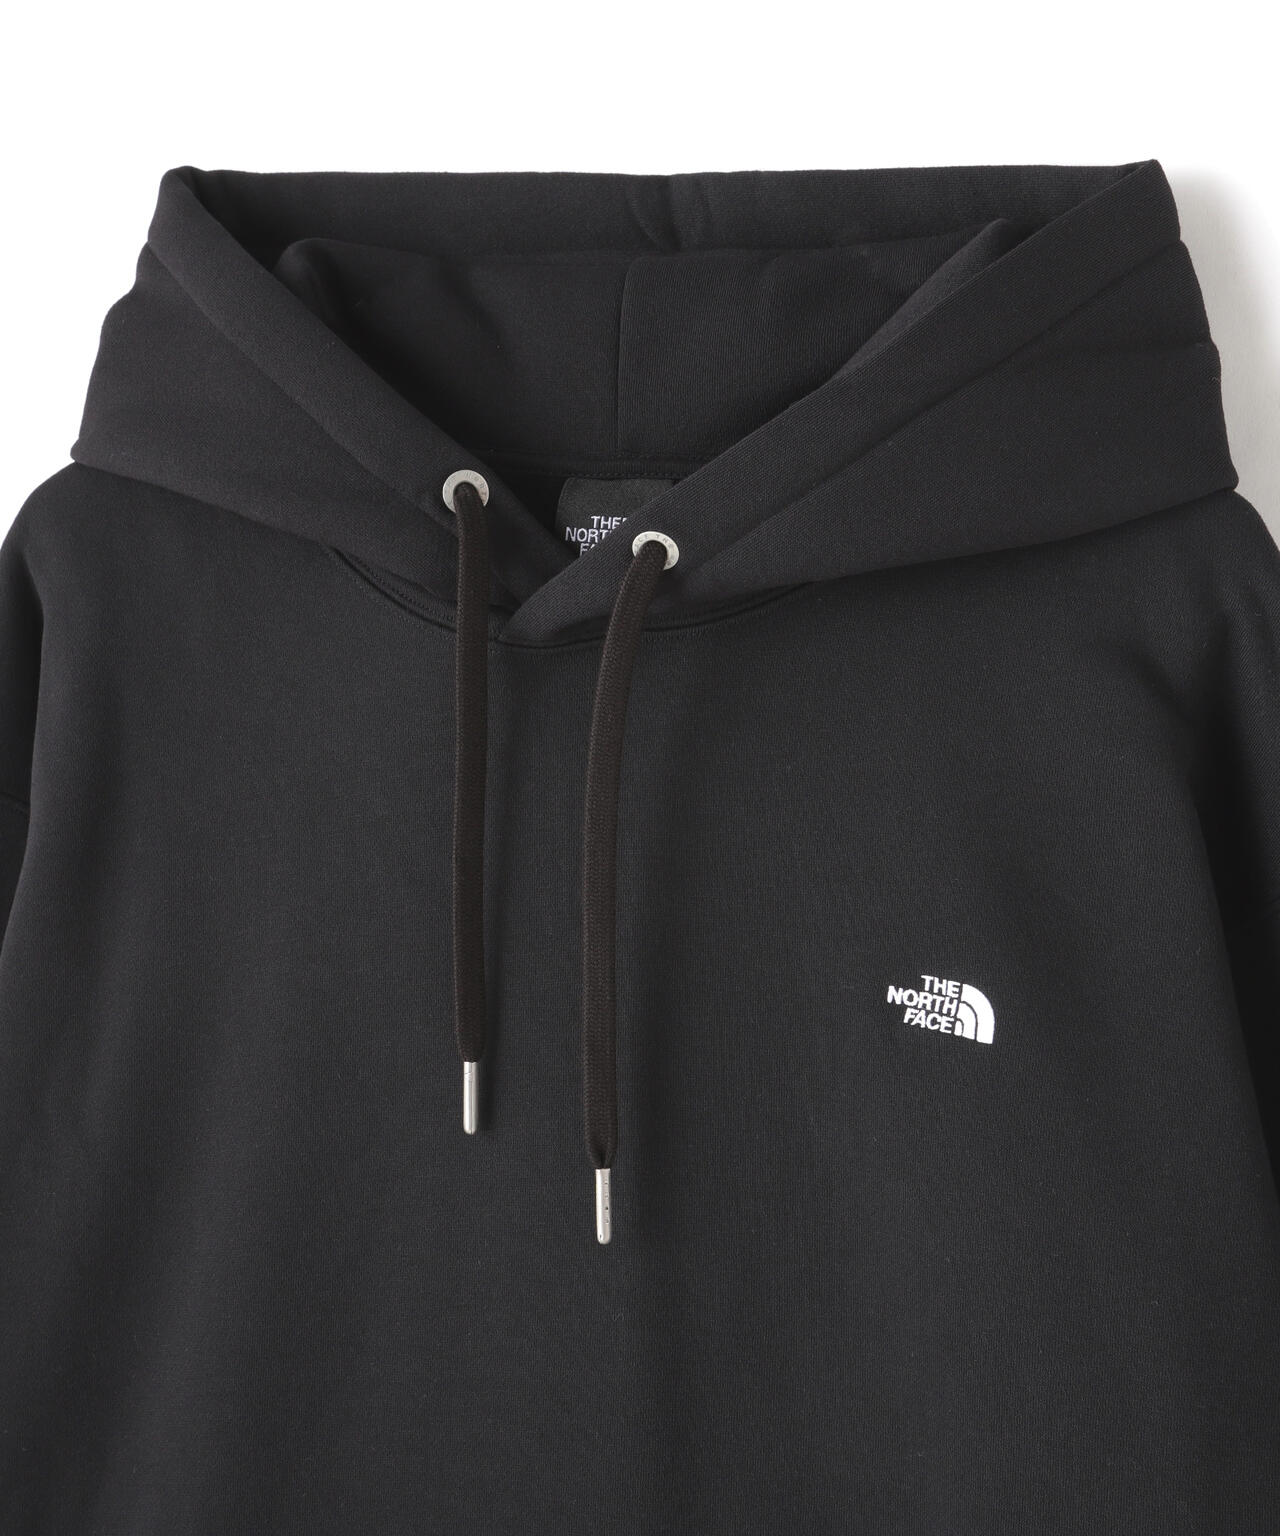 THE NORTH FACE  HOLIDAY HOODIE パーカー US限定トップス